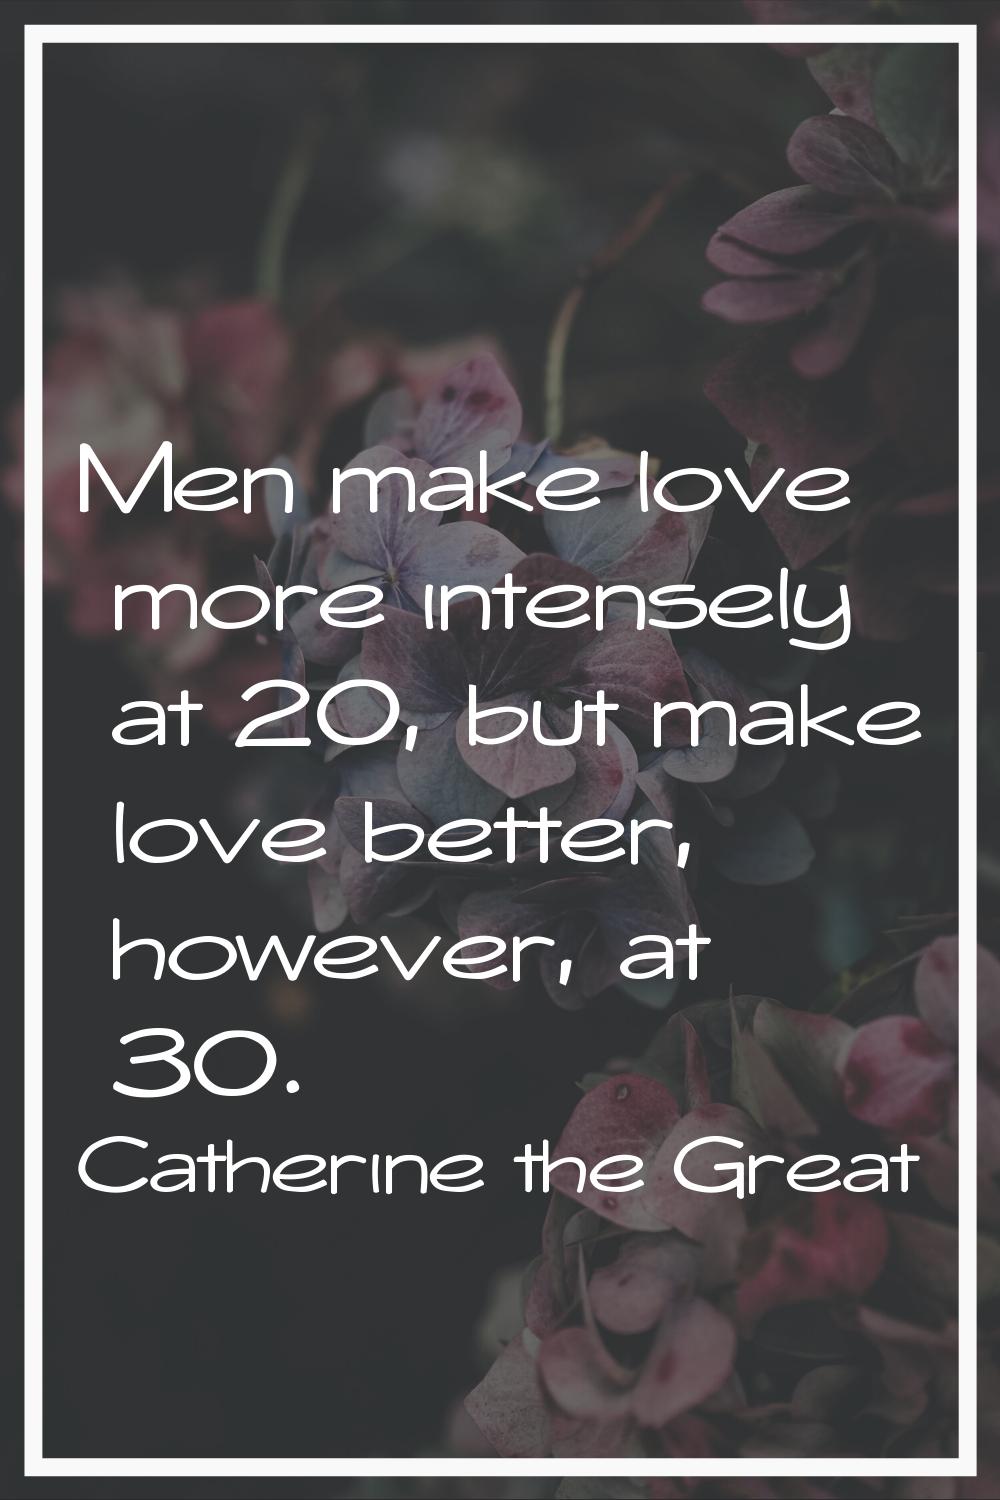 Men make love more intensely at 20, but make love better, however, at 30.